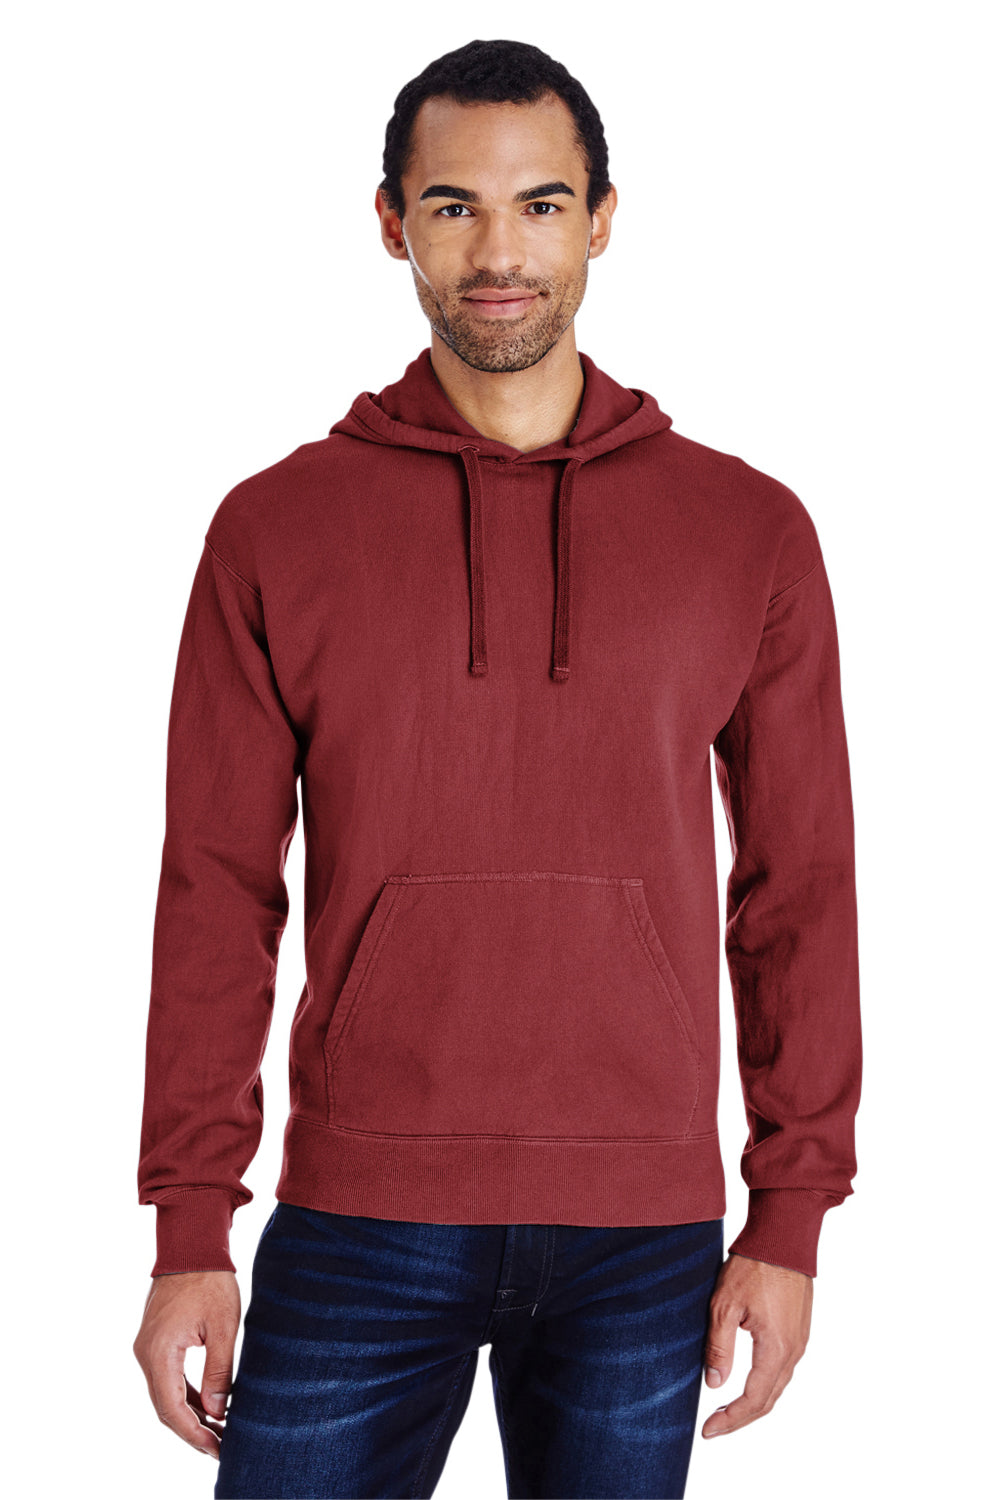 ComfortWash by Hanes GDH450 Hooded Sweatshirt Hoodie Cayenne Red Front